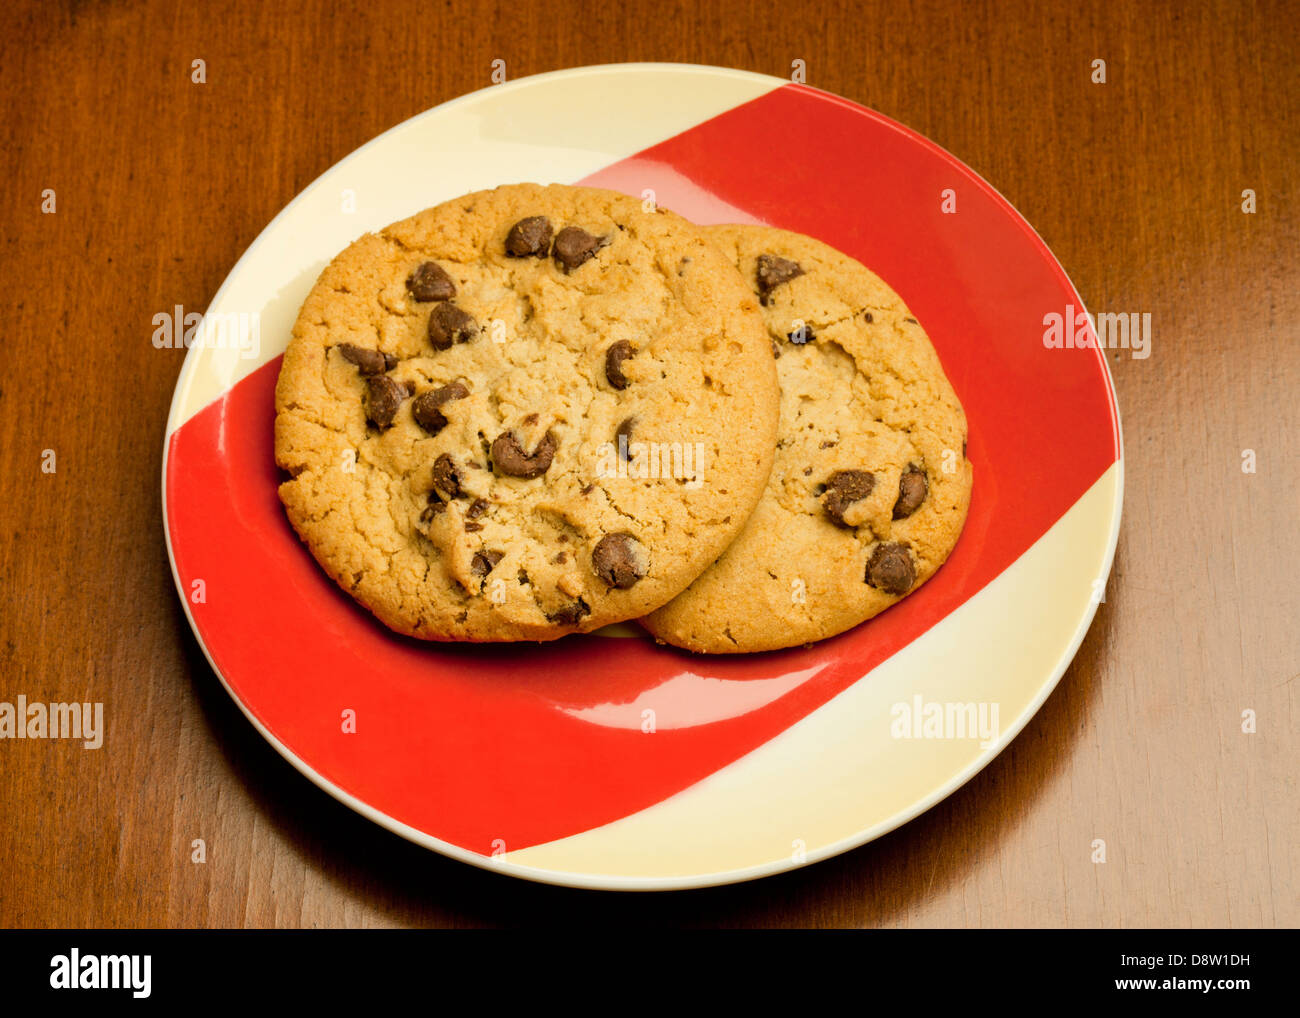 Two chocolate chip cookies on plate Stock Photo